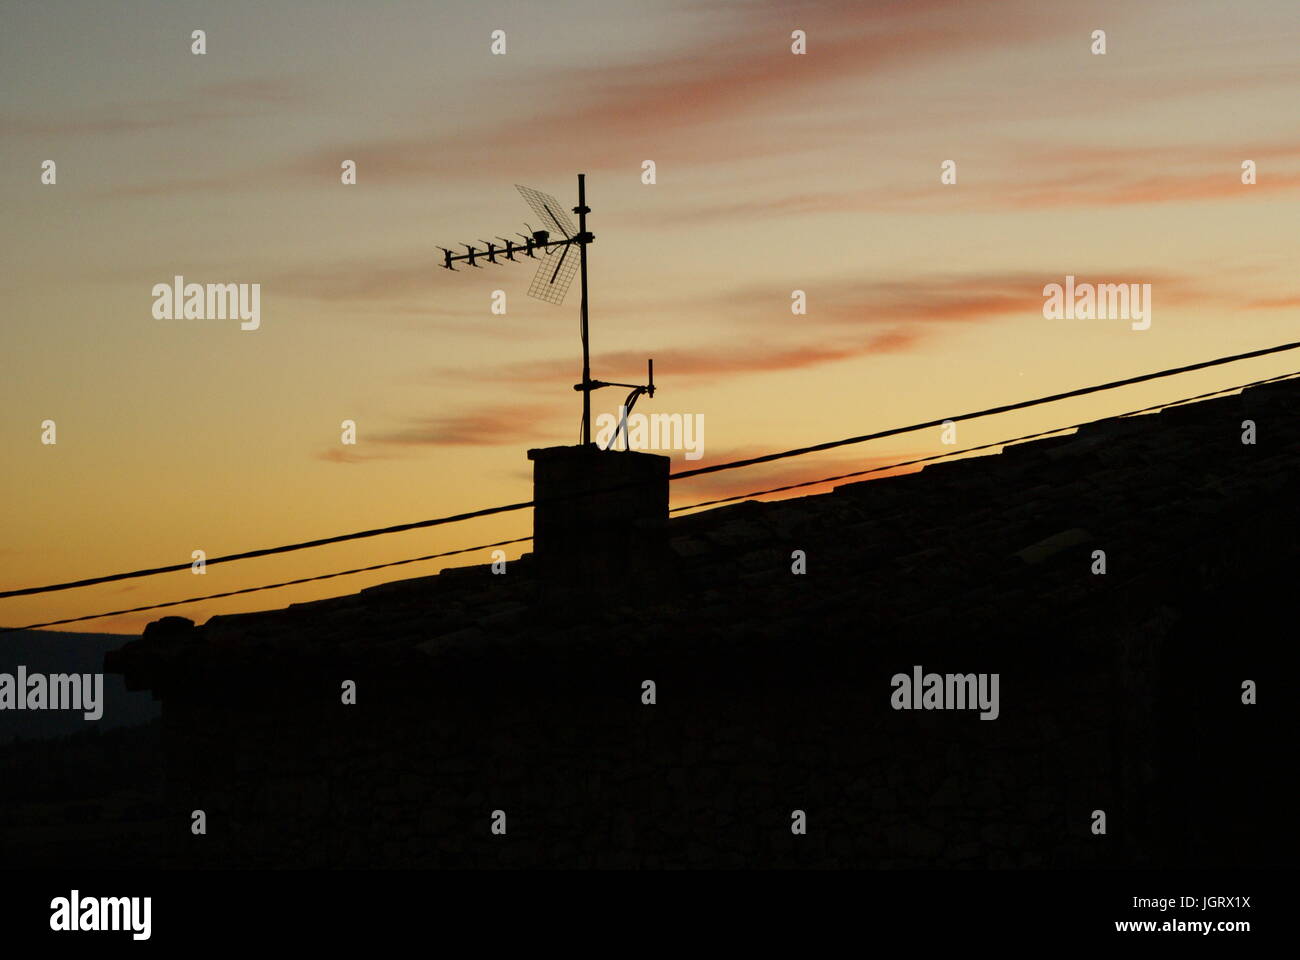 A chimney with an antenna at sunset Stock Photo